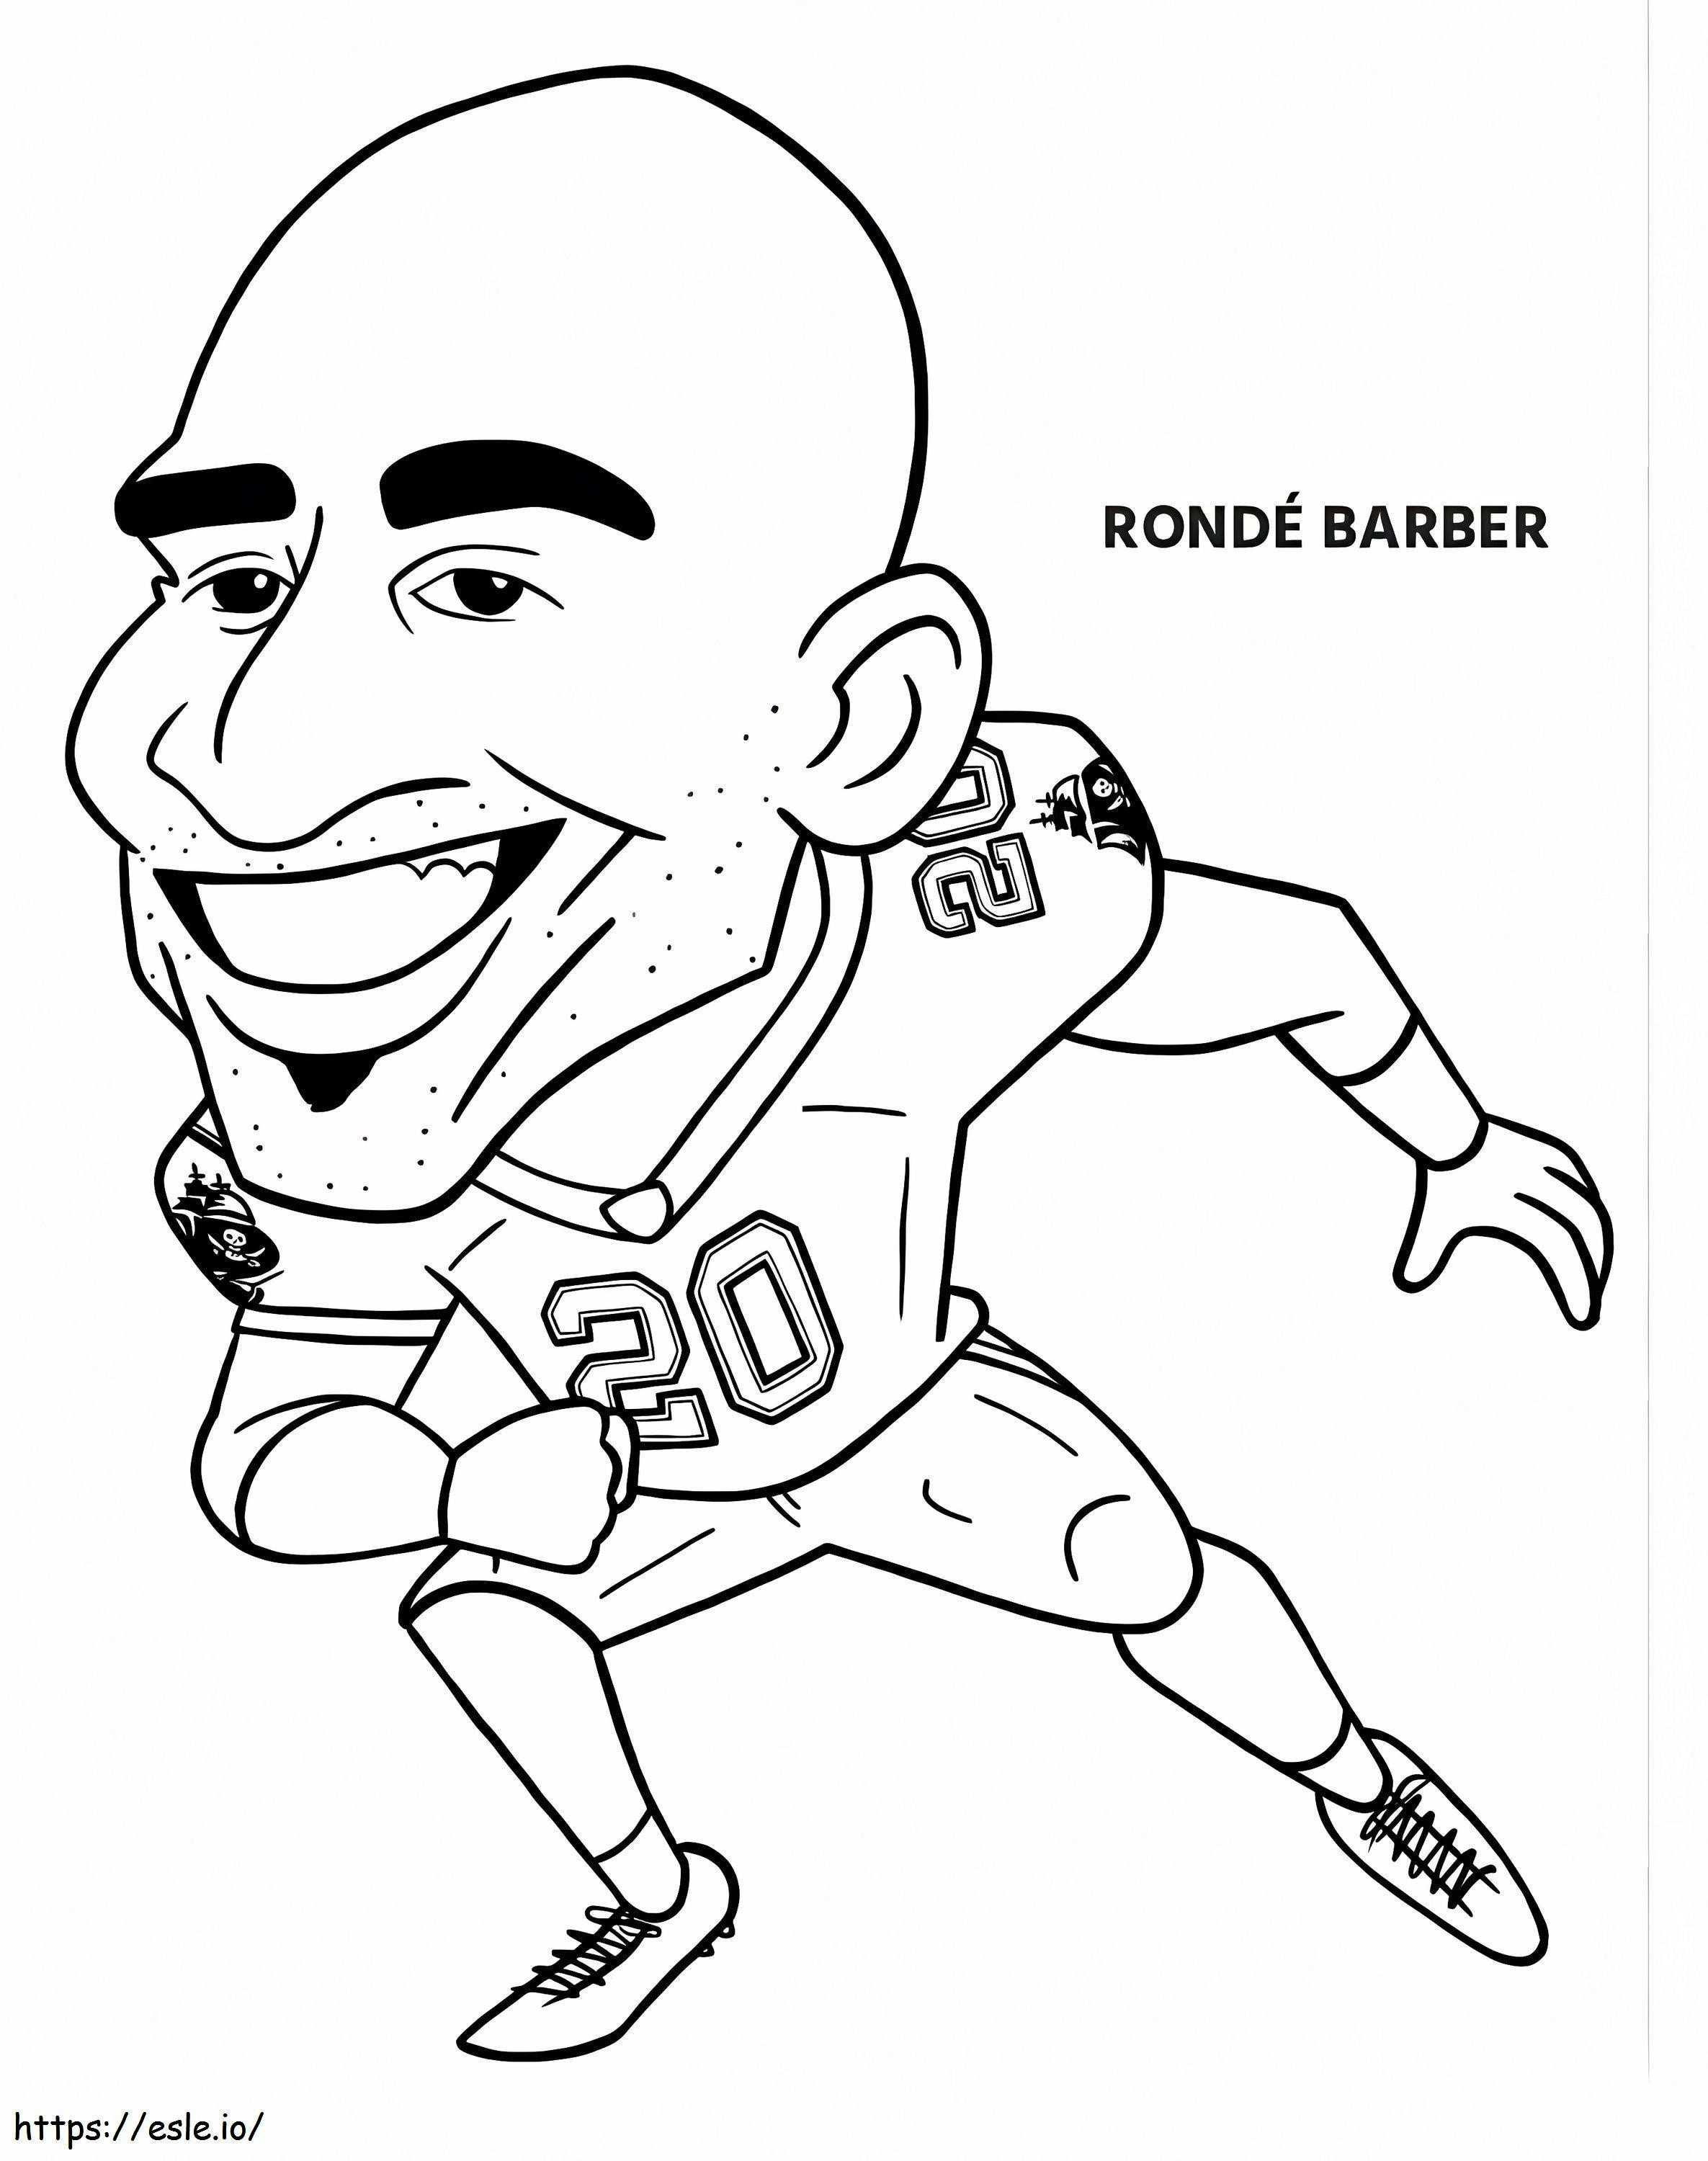 Round Barber coloring page